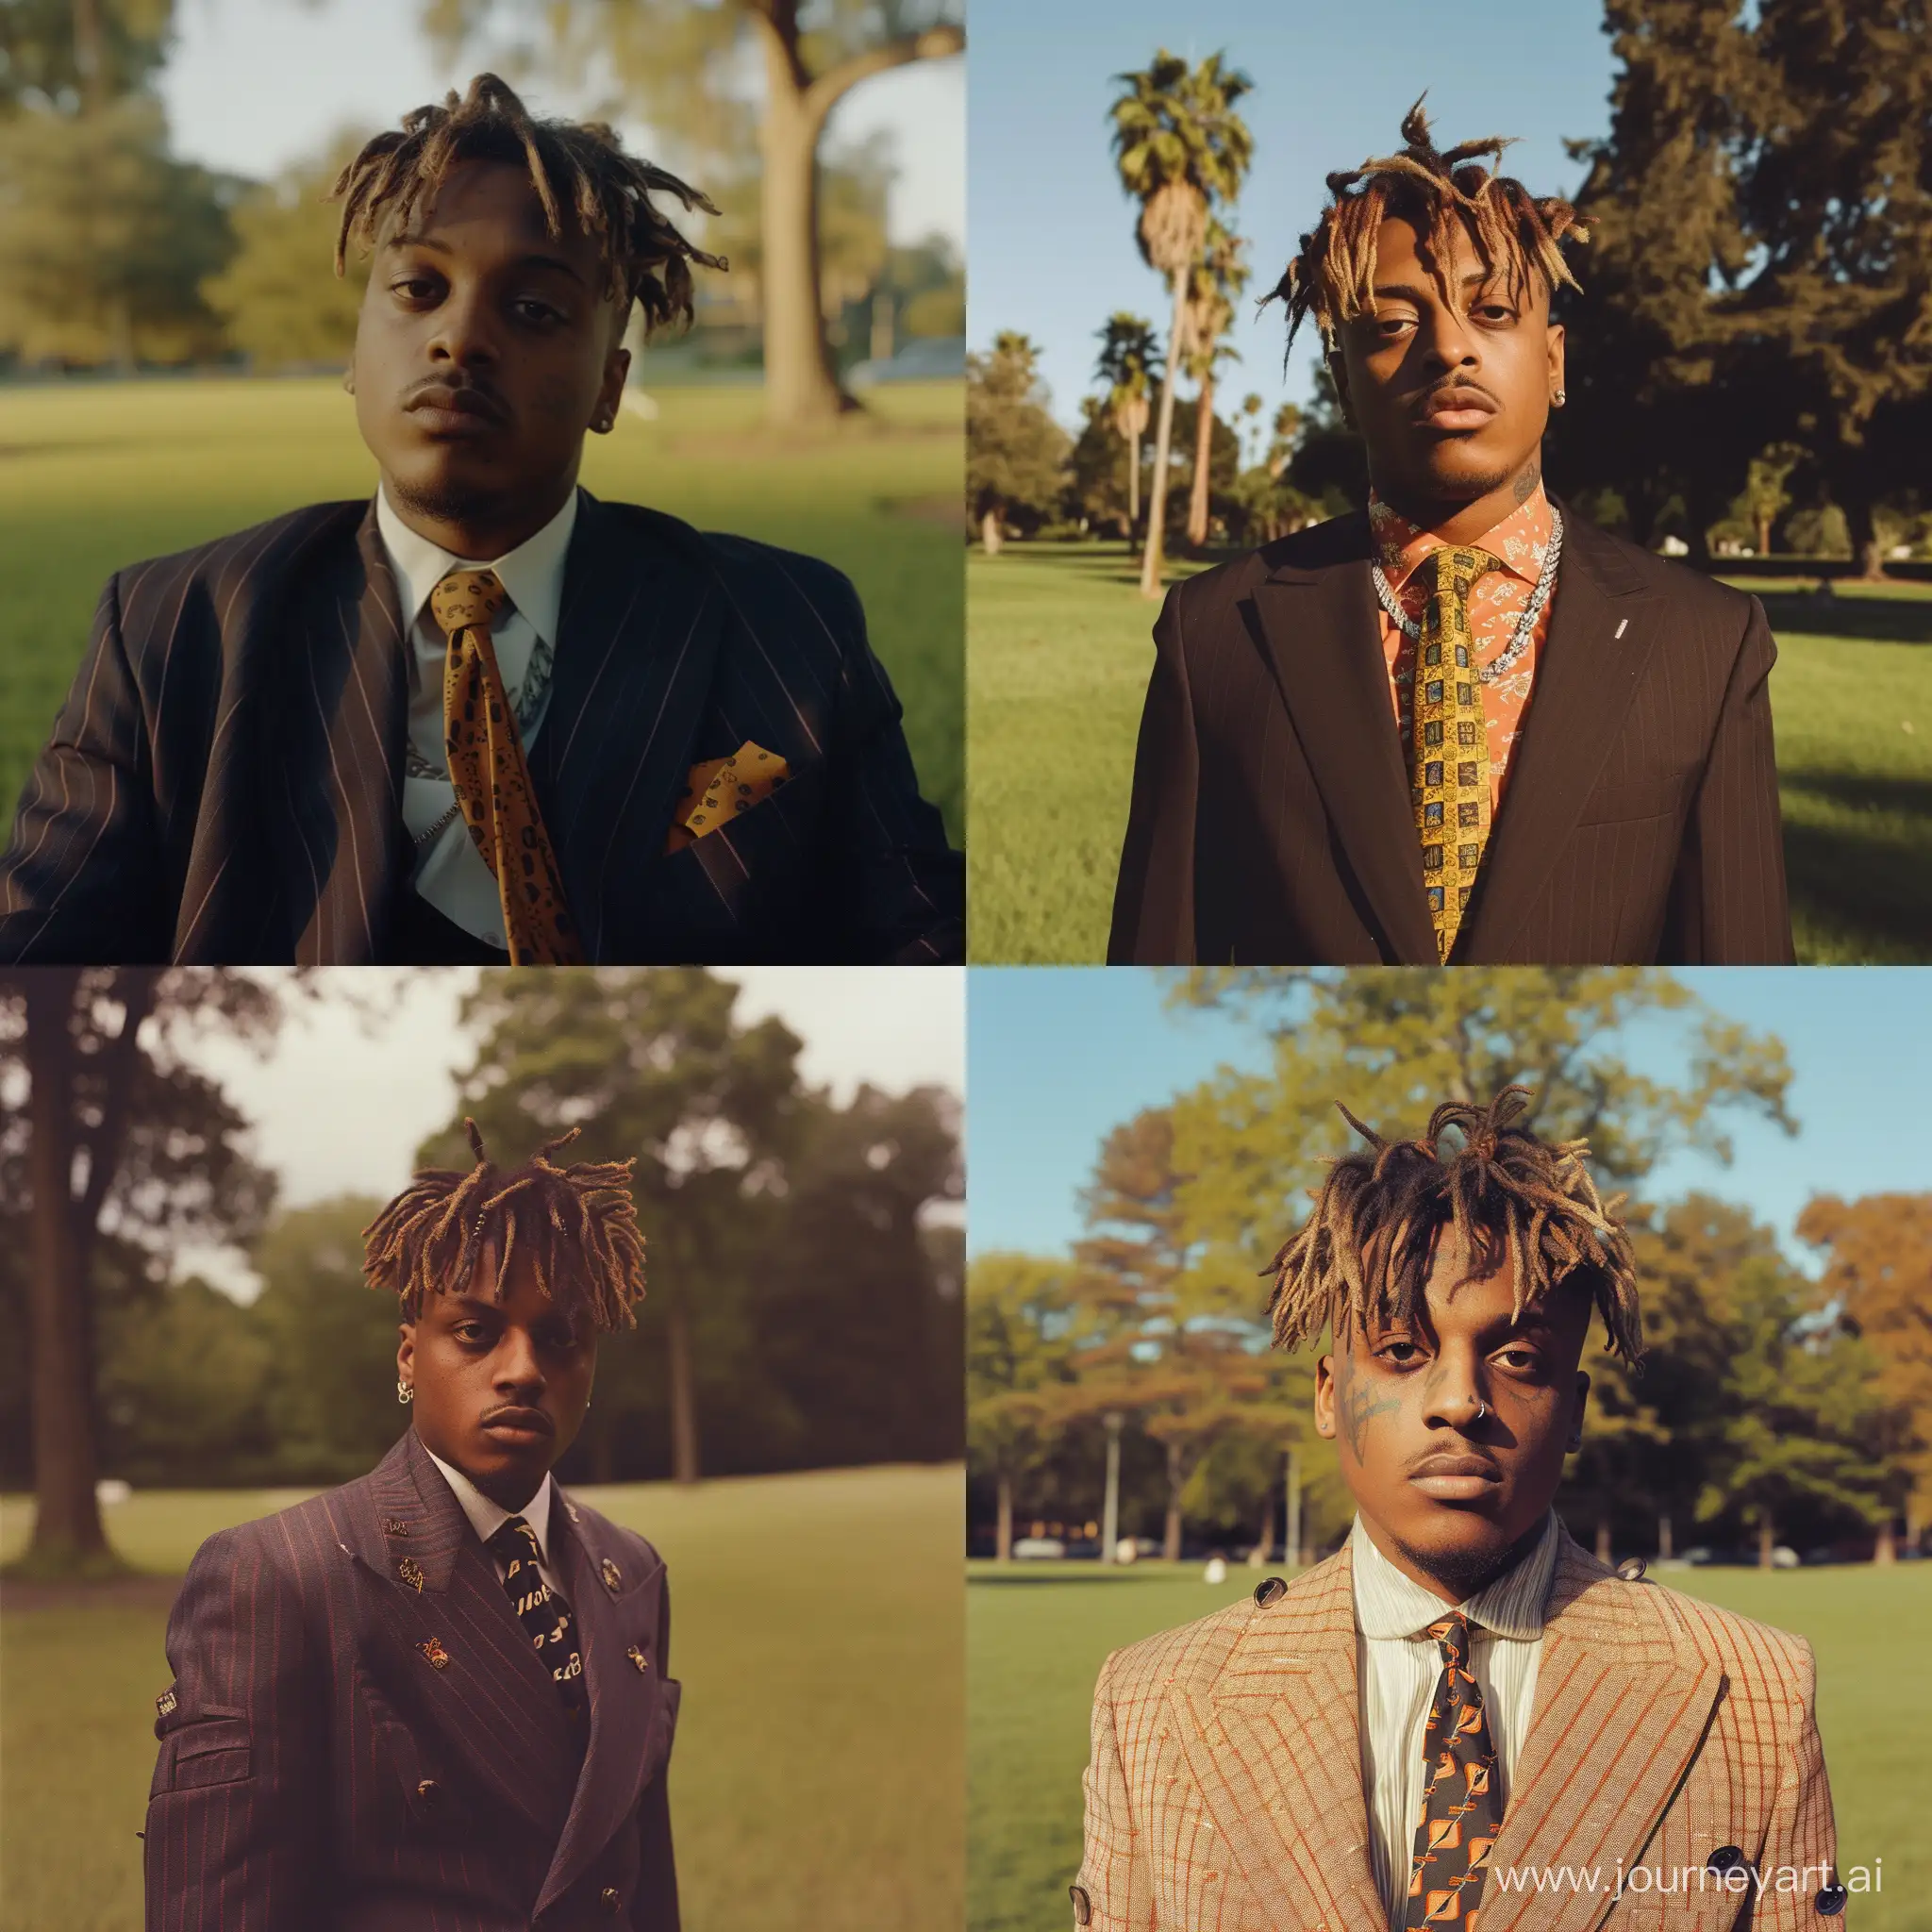 Juice-WRLD-Dons-1960s-Style-Suit-and-Tie-in-Park-Movie-Scene